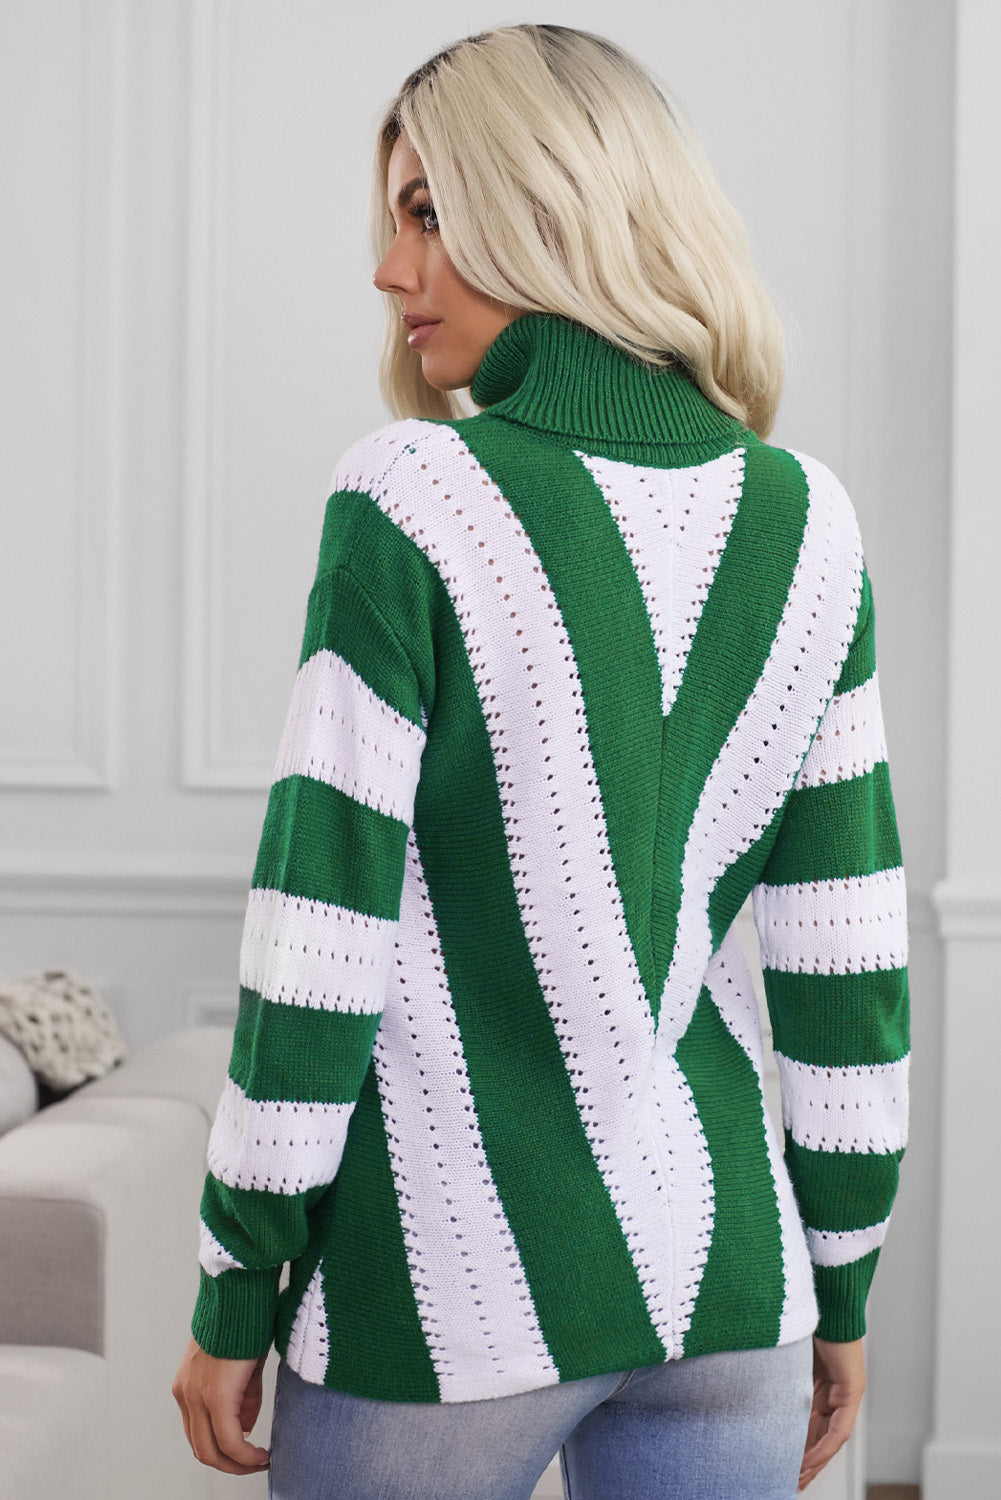 Pull Femme Col Roule a Rayures Vert et Blanc